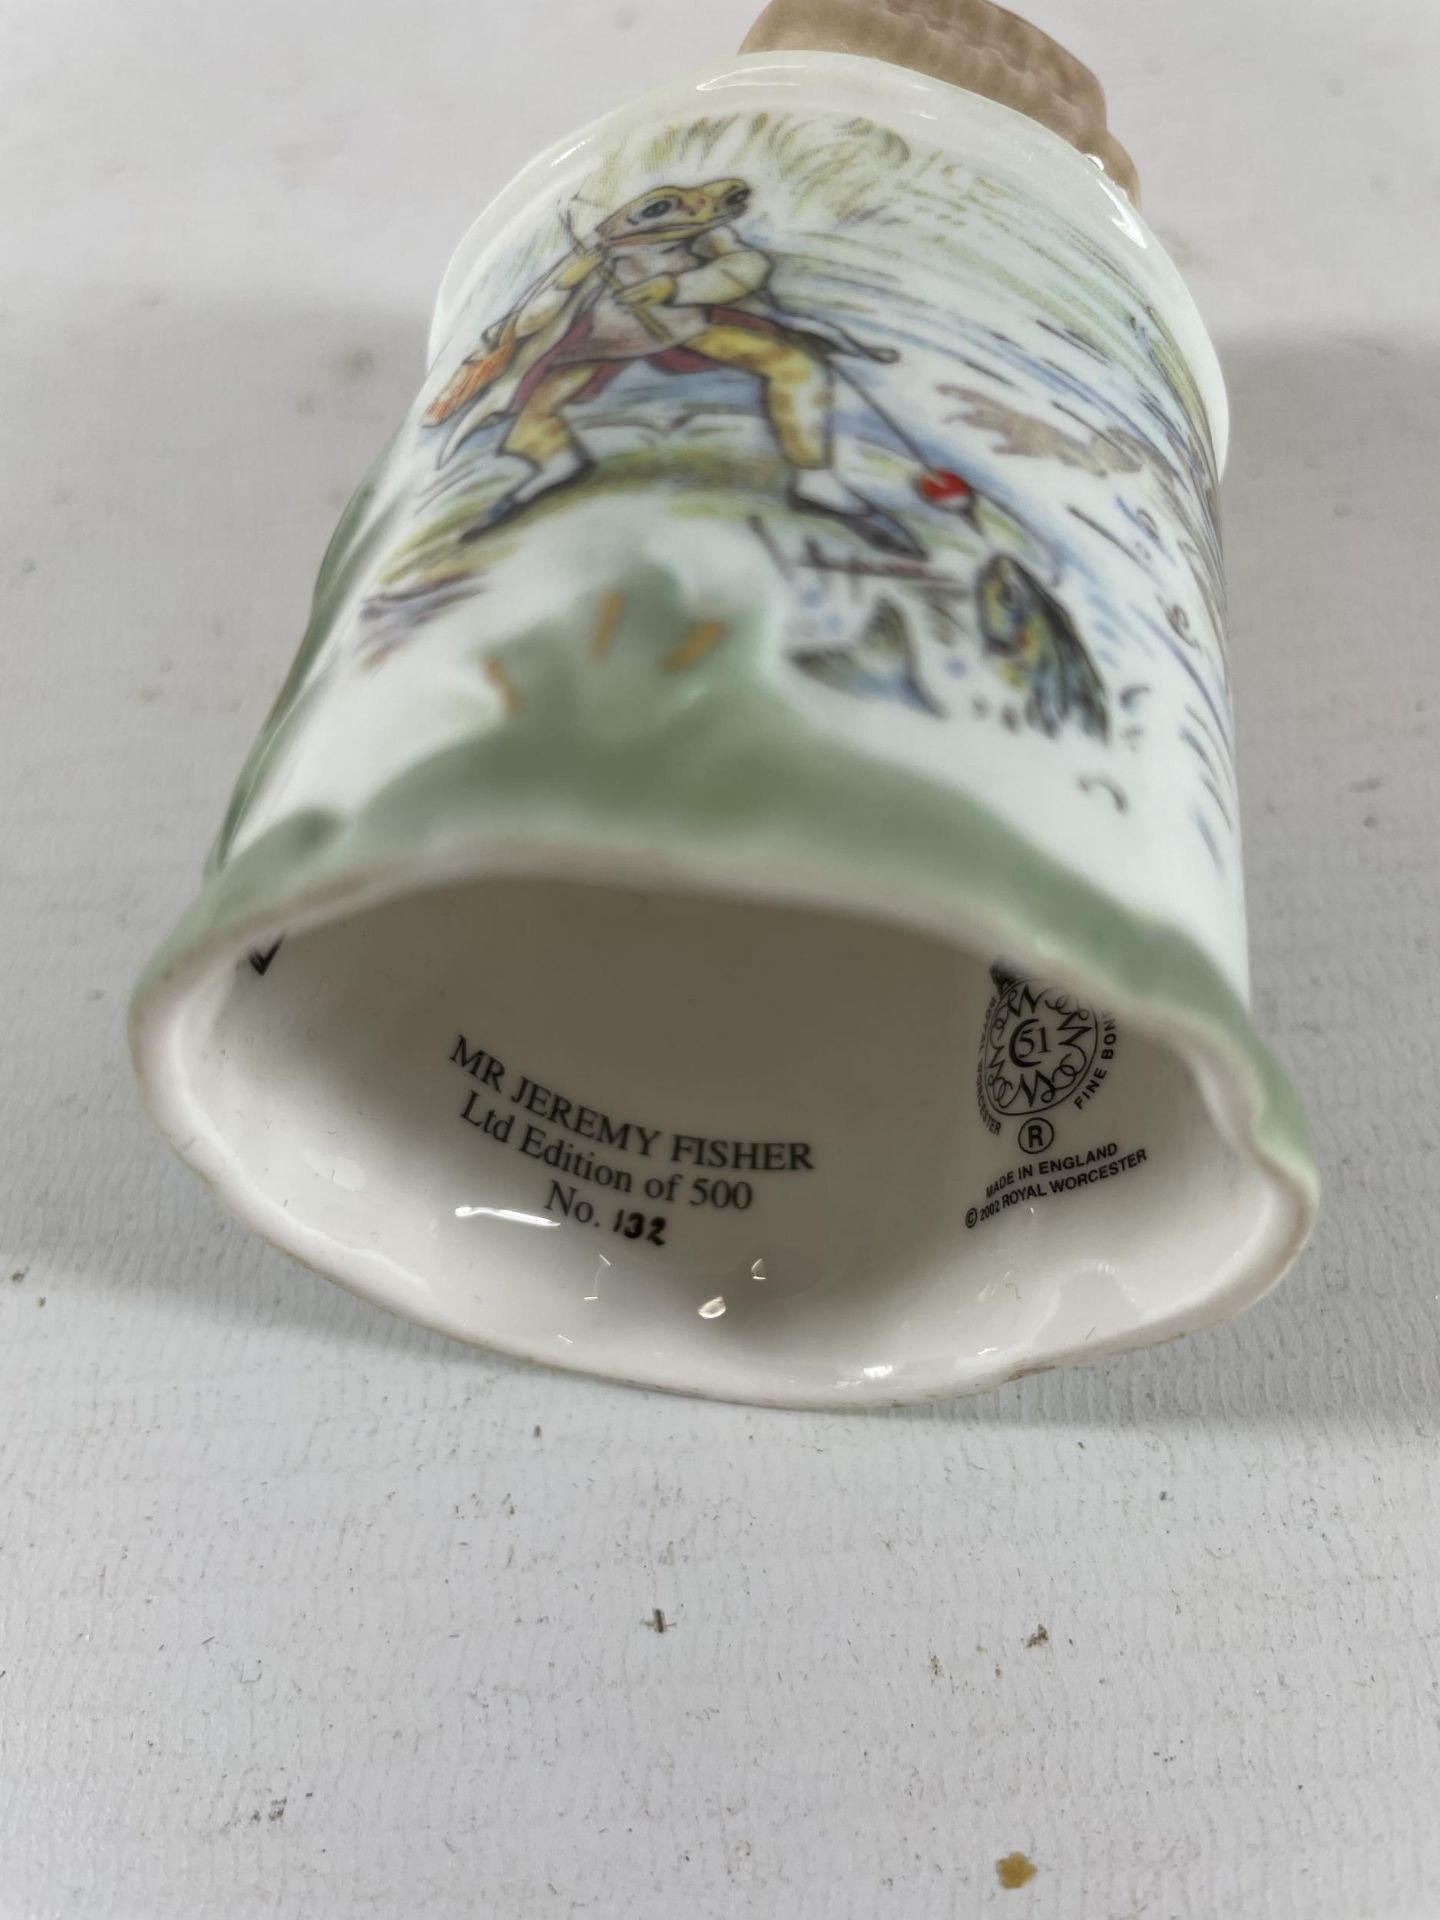 A LIMITED EDITION ROYAL WORCESTER MR JEREMY FISHER BEATRIX POTTER CERAMIC CANDLE SNUFFER - Image 2 of 3